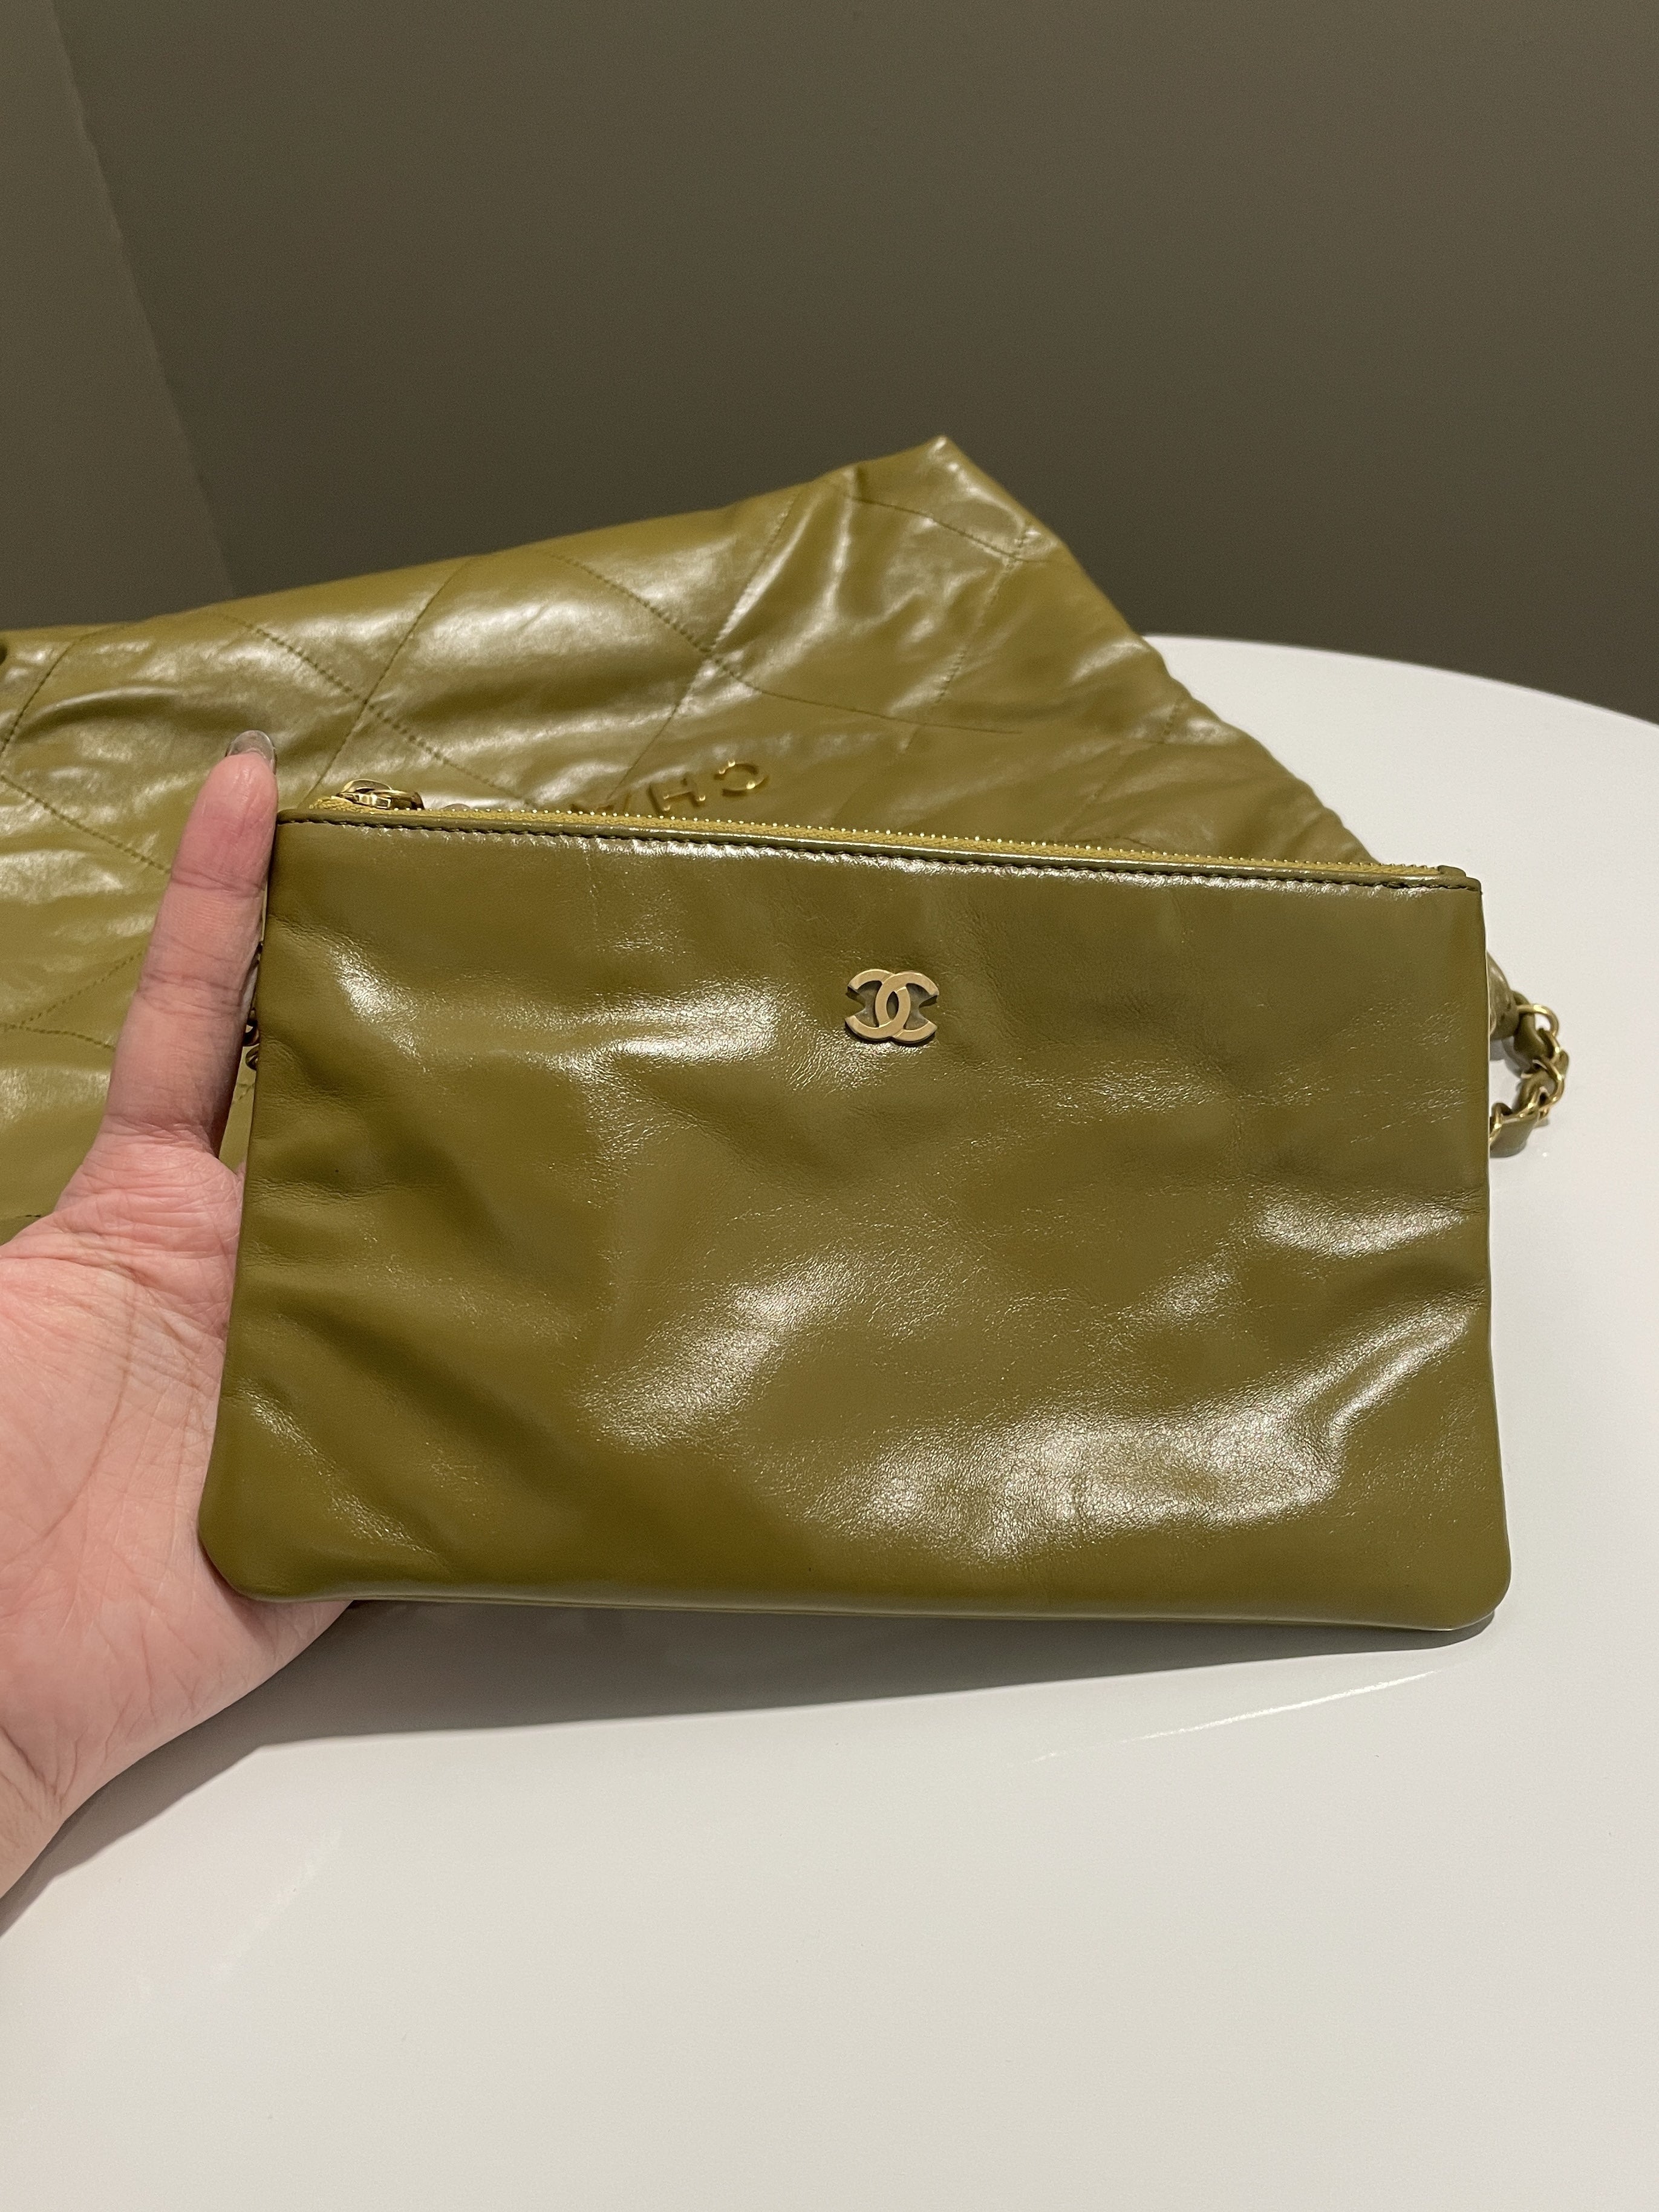 Chanel 22 Small Olive